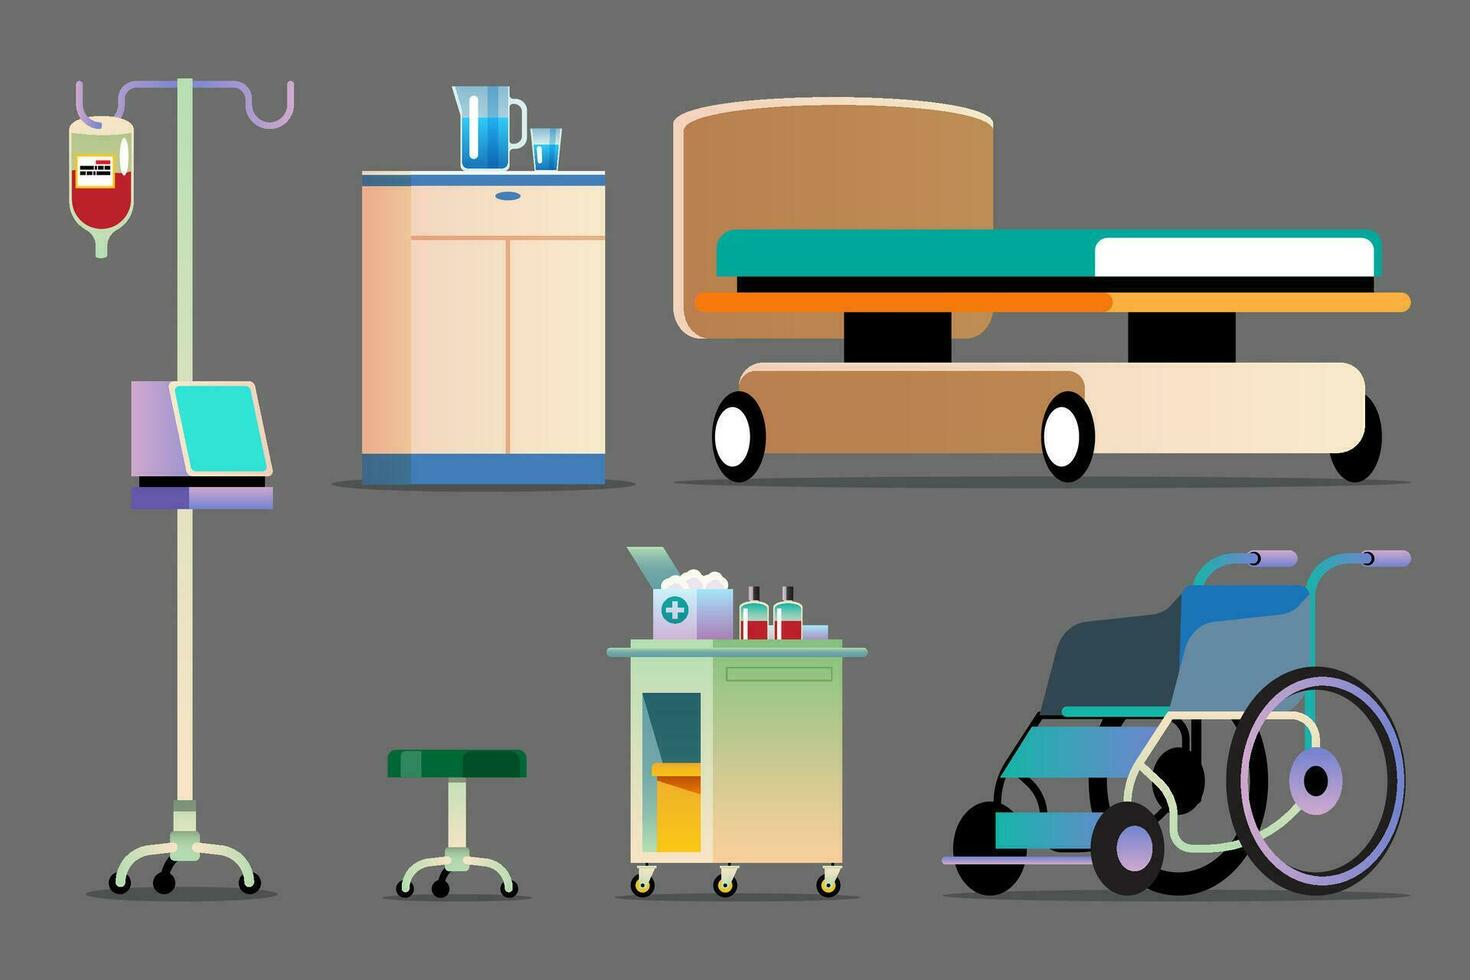 Illustration of a set of hospital equipment including a stretcher, bedside table, wheelchair. vector